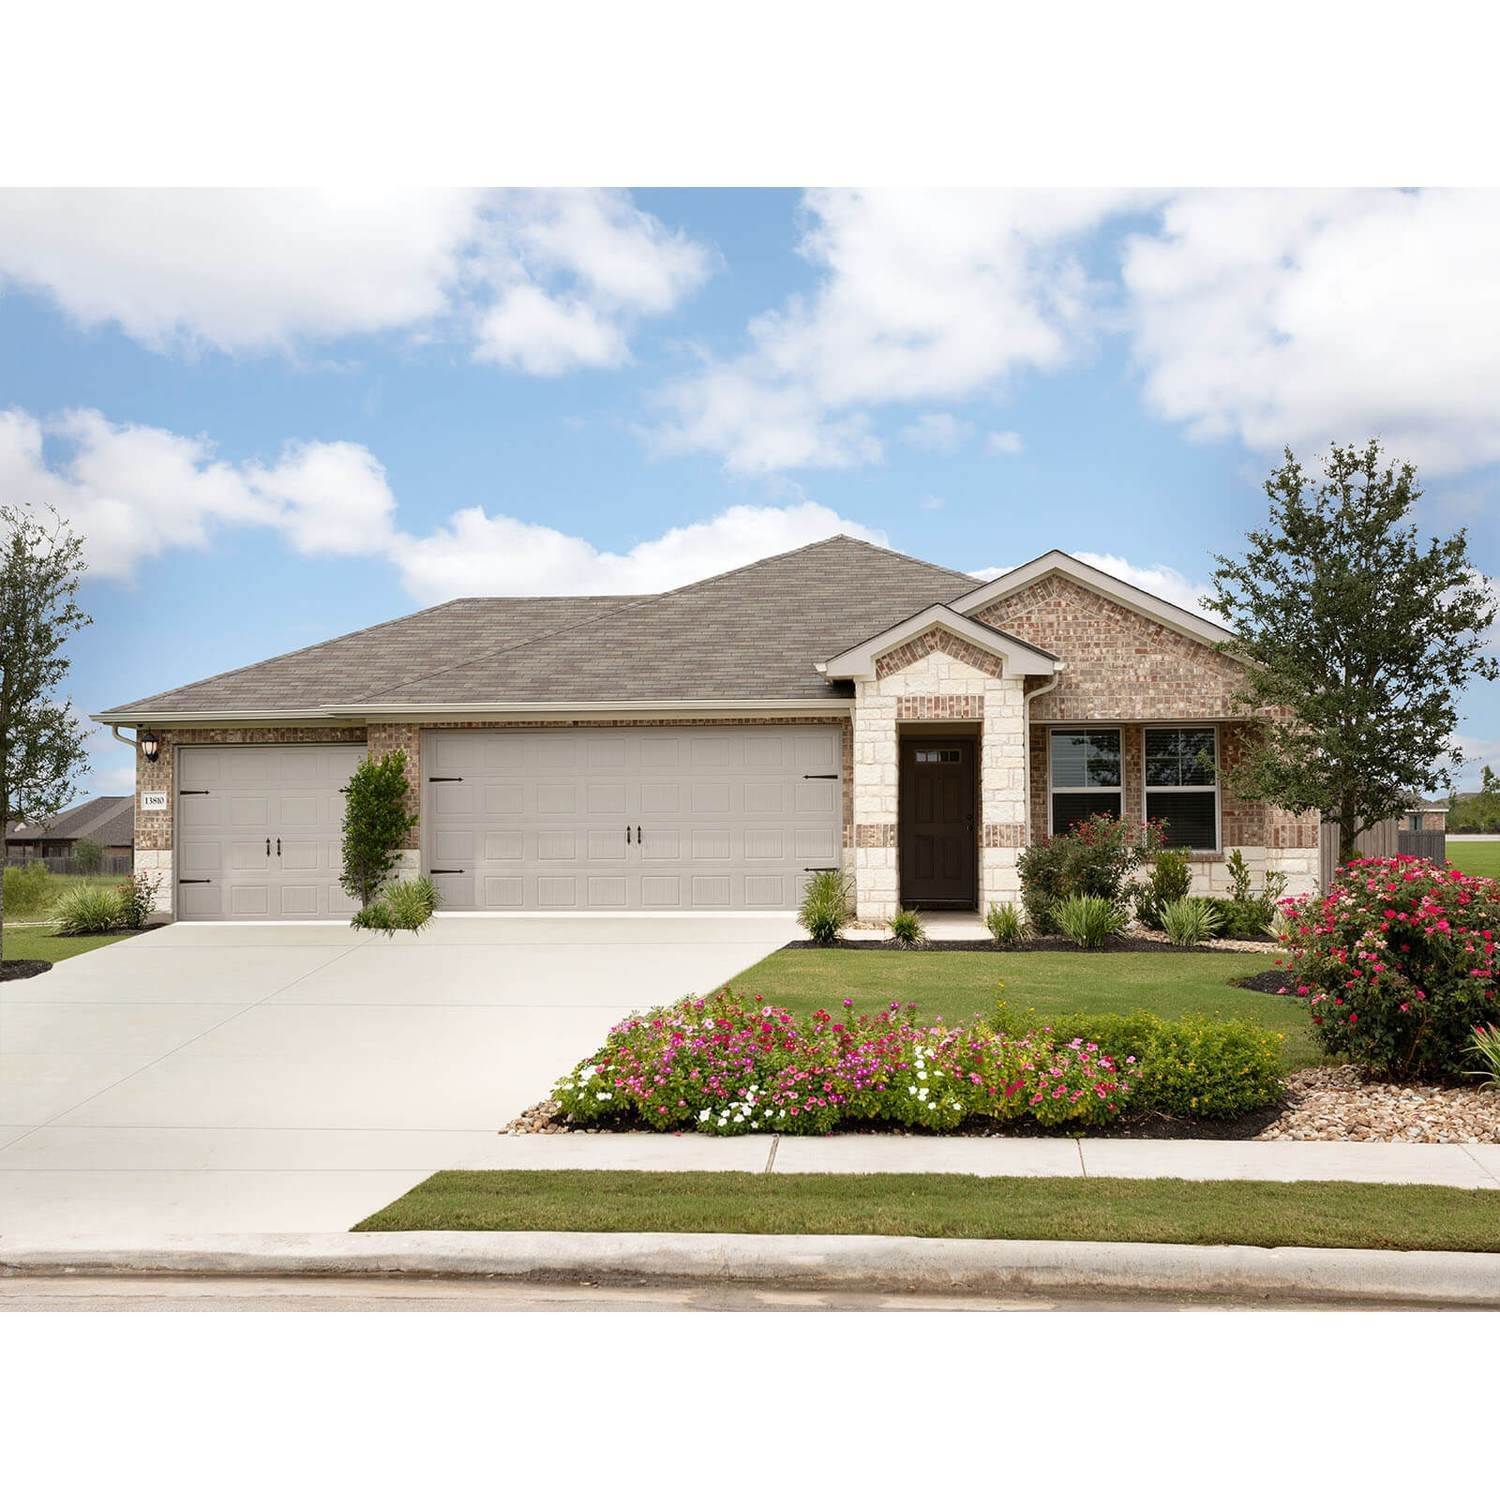 ShadowGlen - Reserve Collection building at 13810 Rosebud Isle Dr., Manor, TX 78653